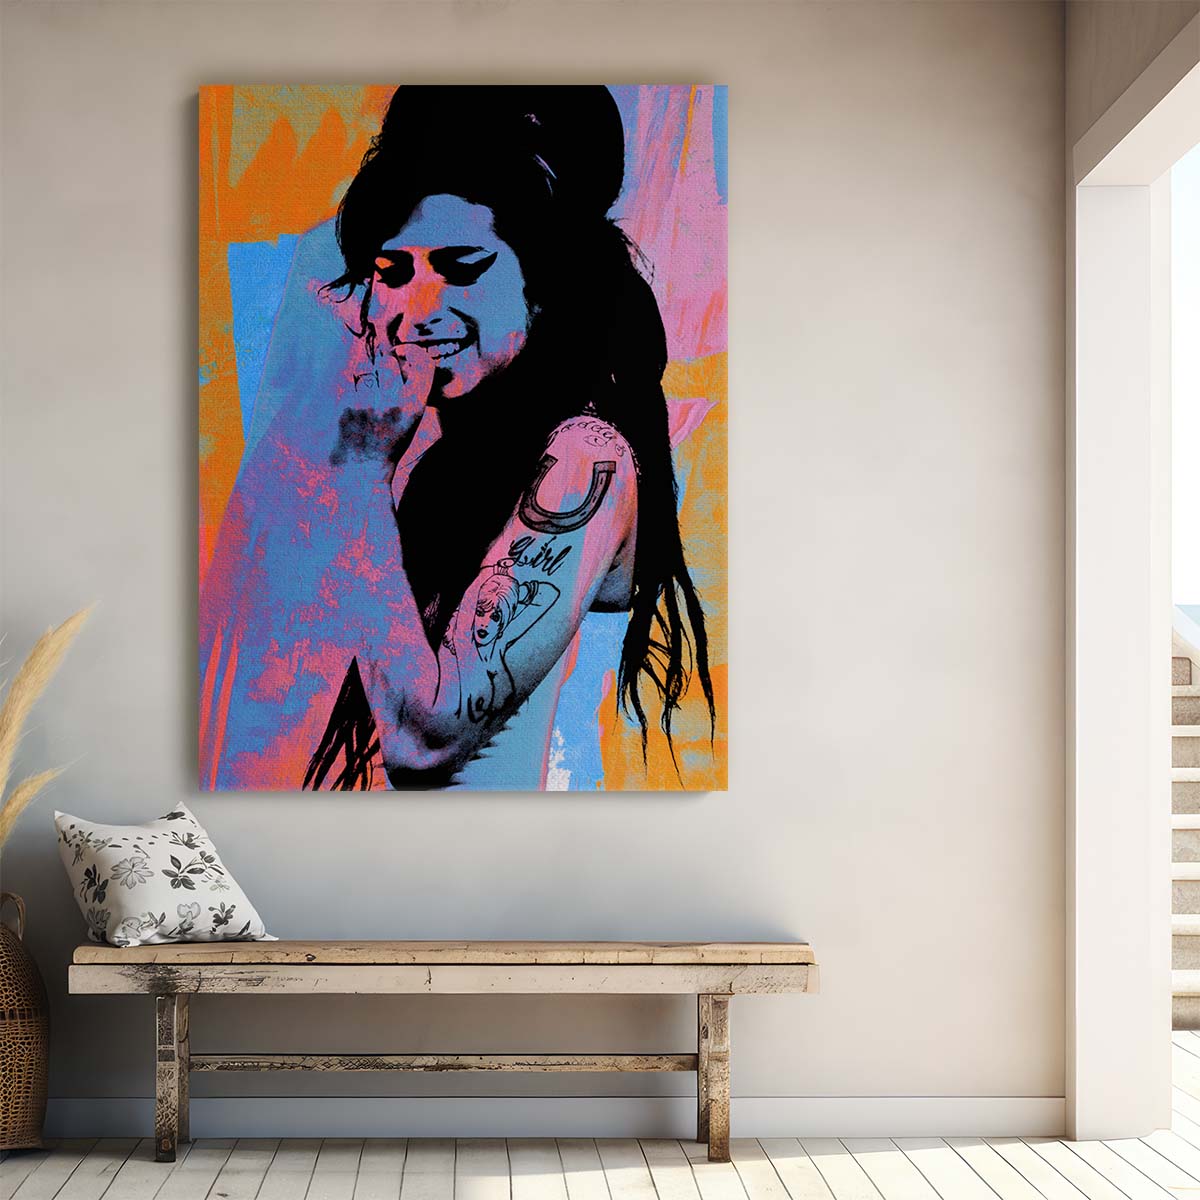 Amy Winehouse Portrait Wall Art by Luxuriance Designs. Made in USA.